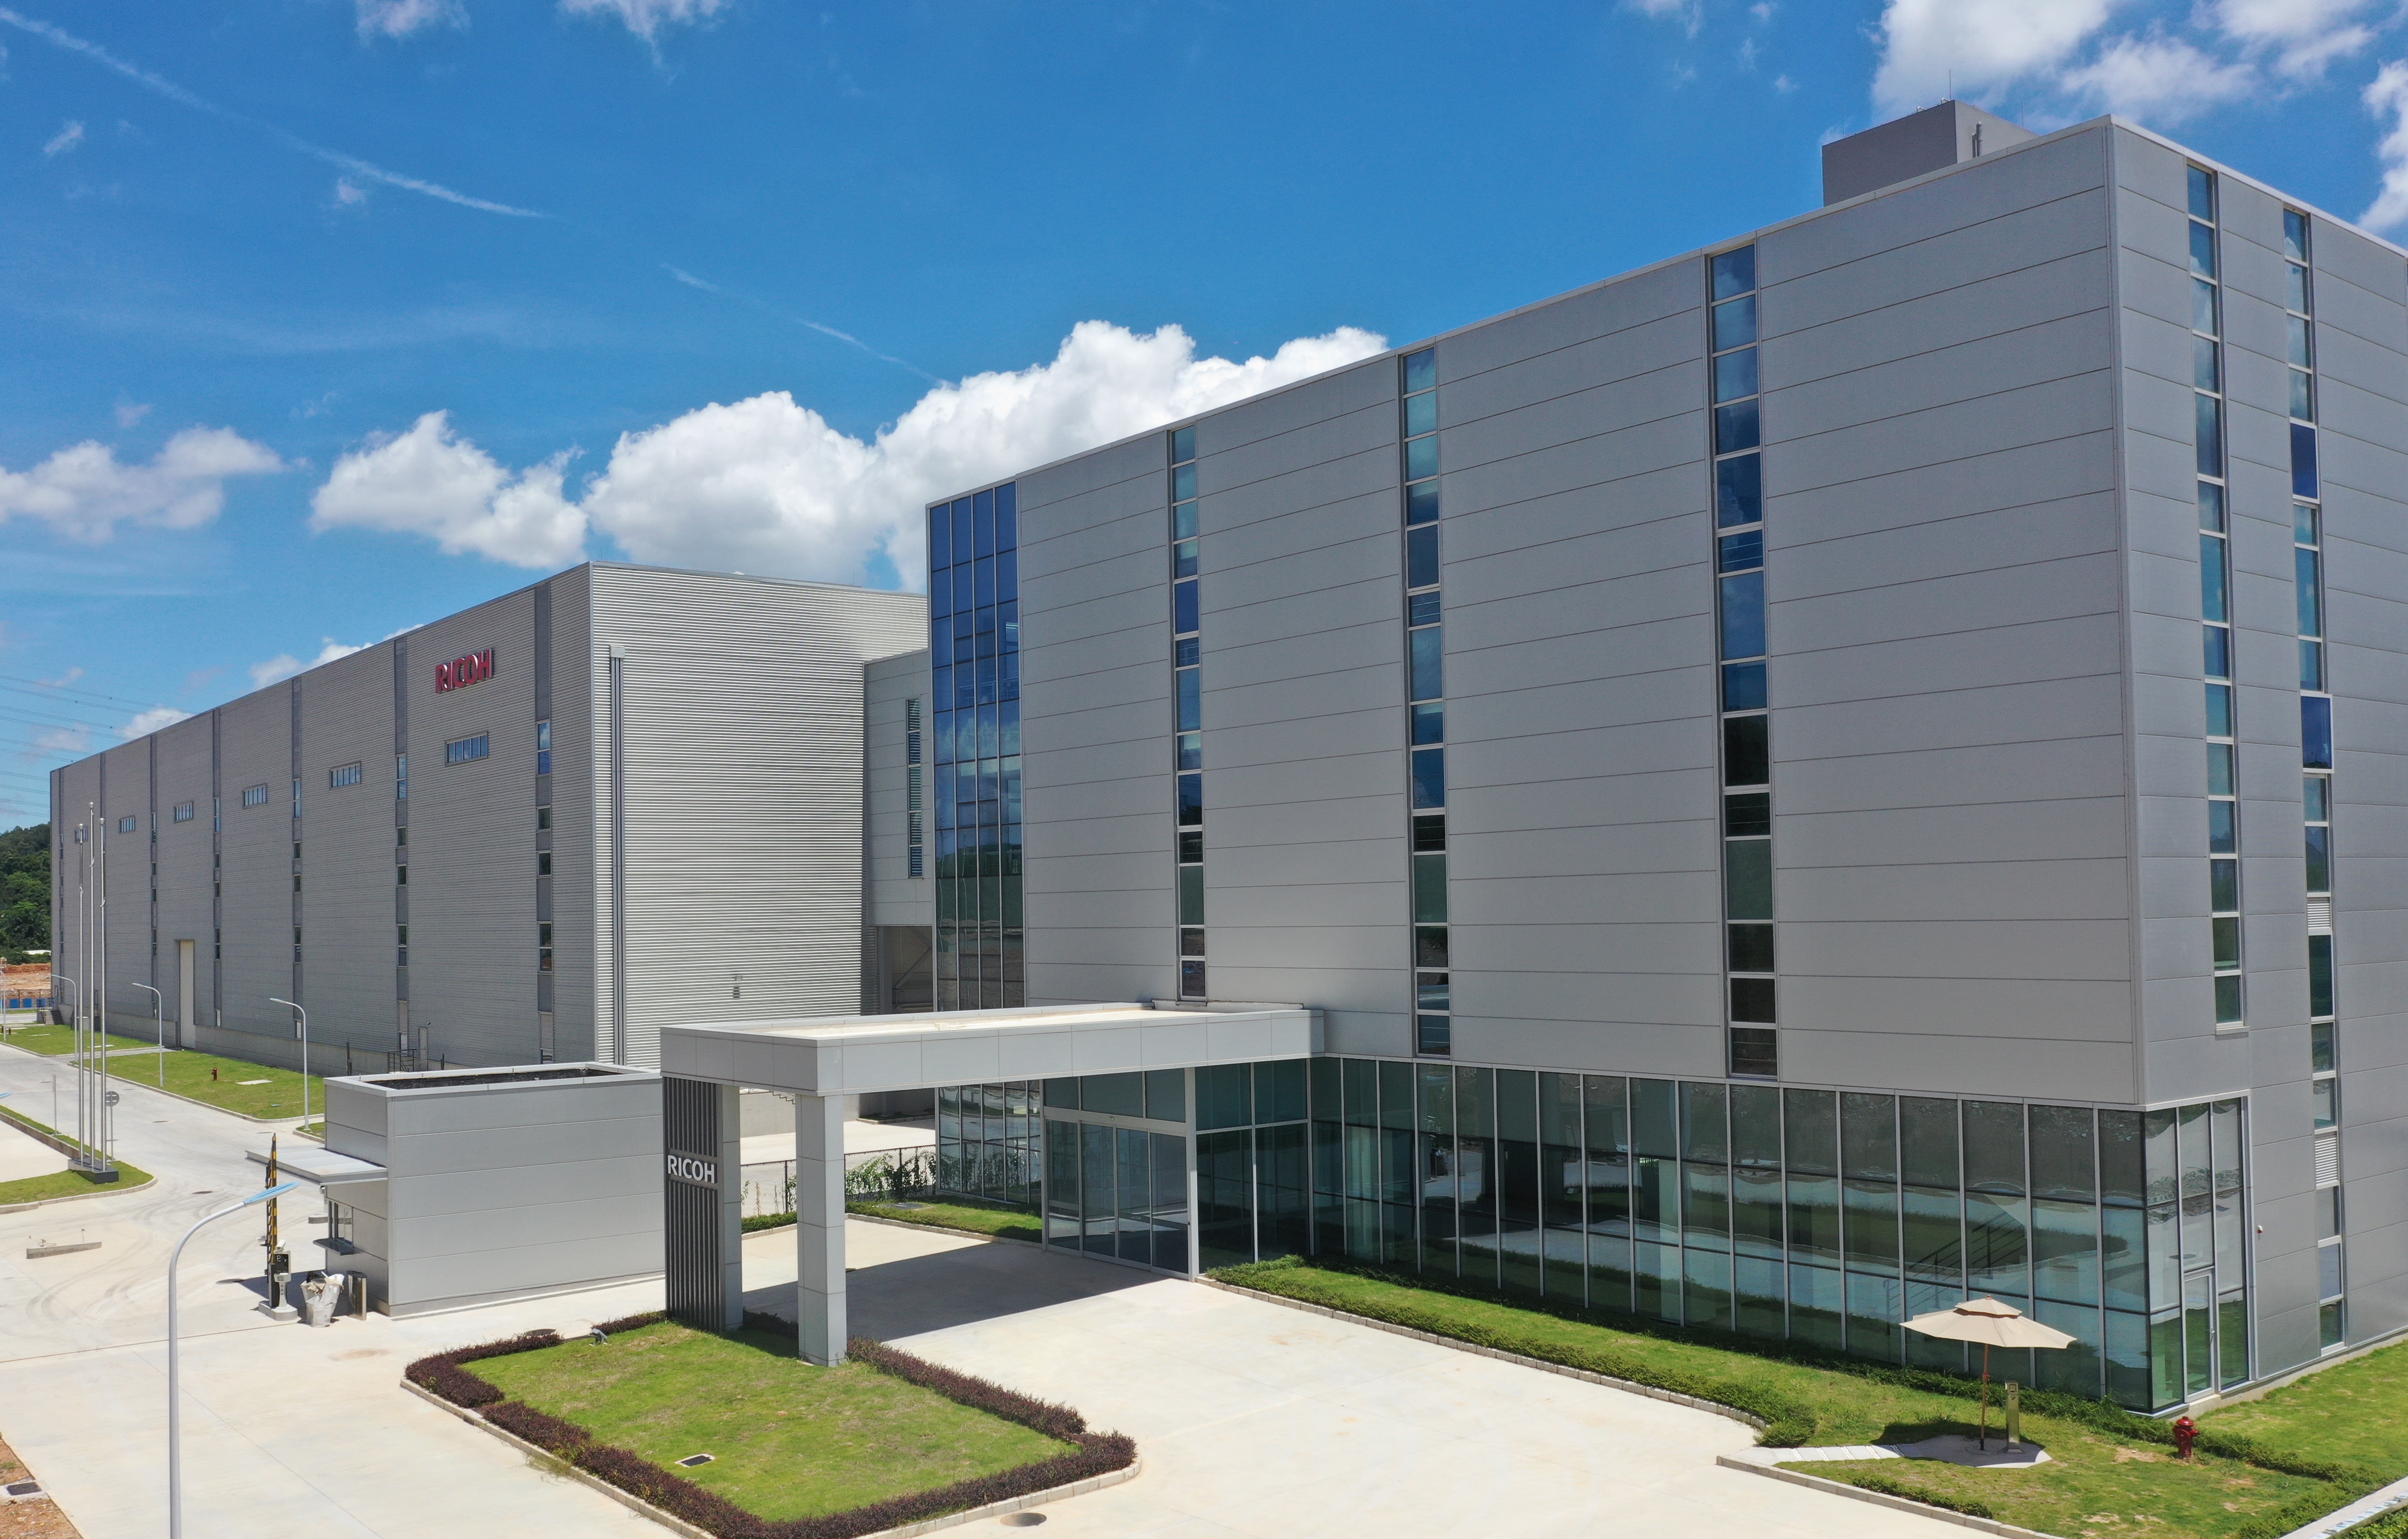 Ricoh starts mass production of office printing devices in Dongguan Guangdong, China from July 2020